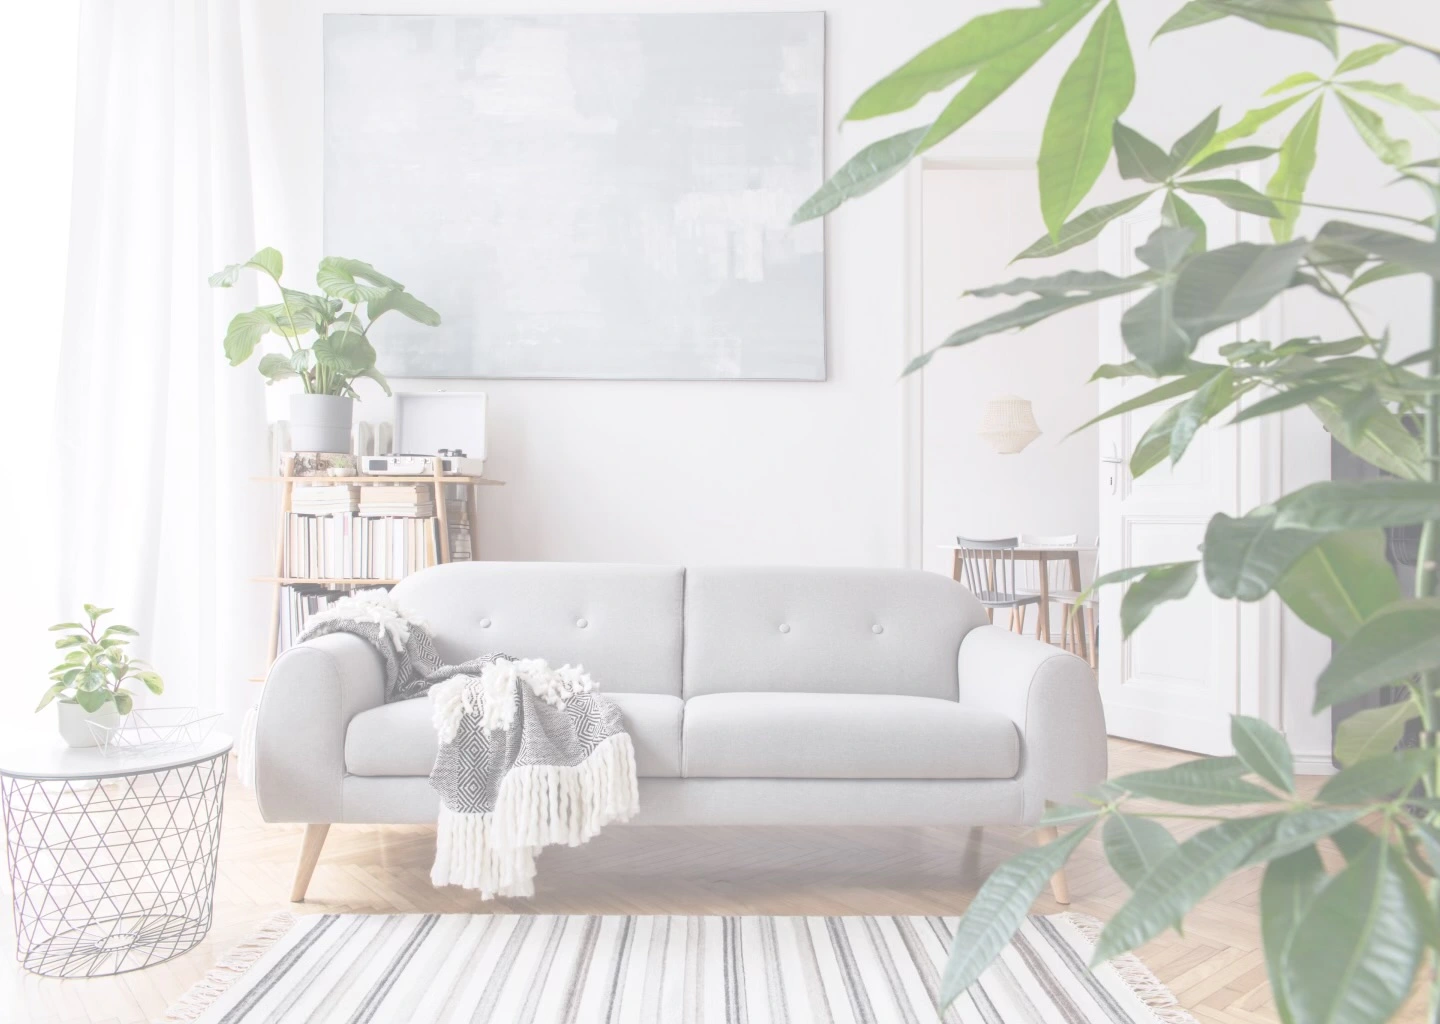 5 Trendy Room Themes to Try with Our AI-Powered Interior Design Tool